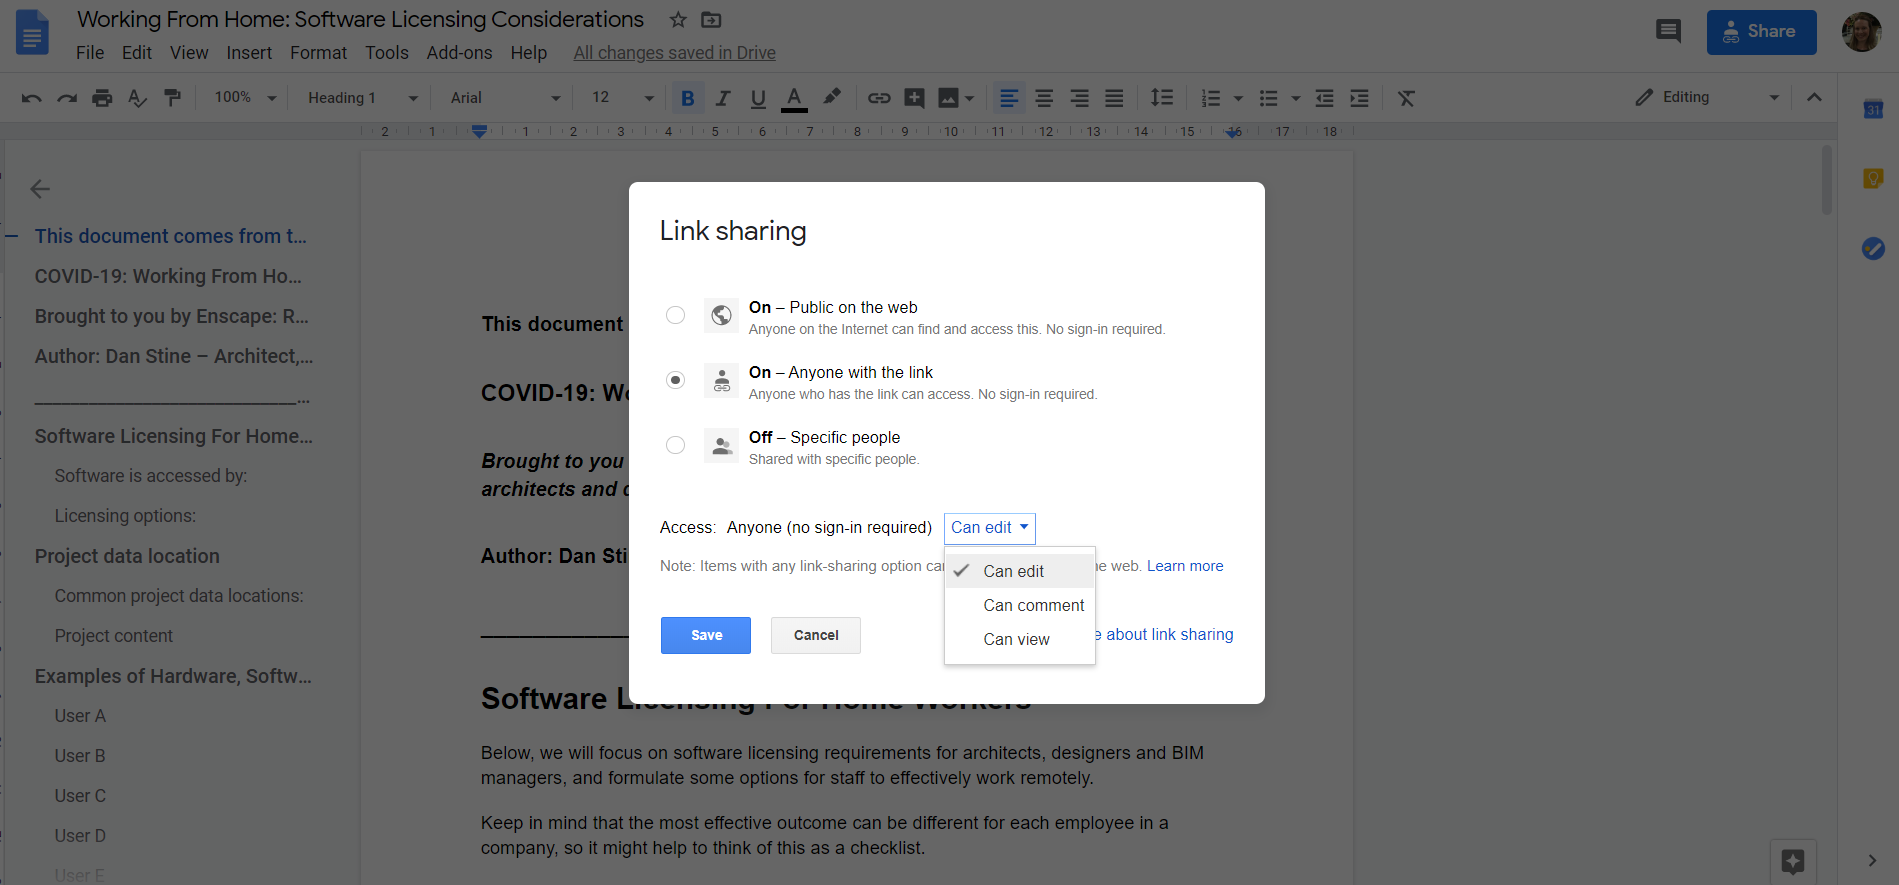 Google Docs: How to Enable Editing Rights